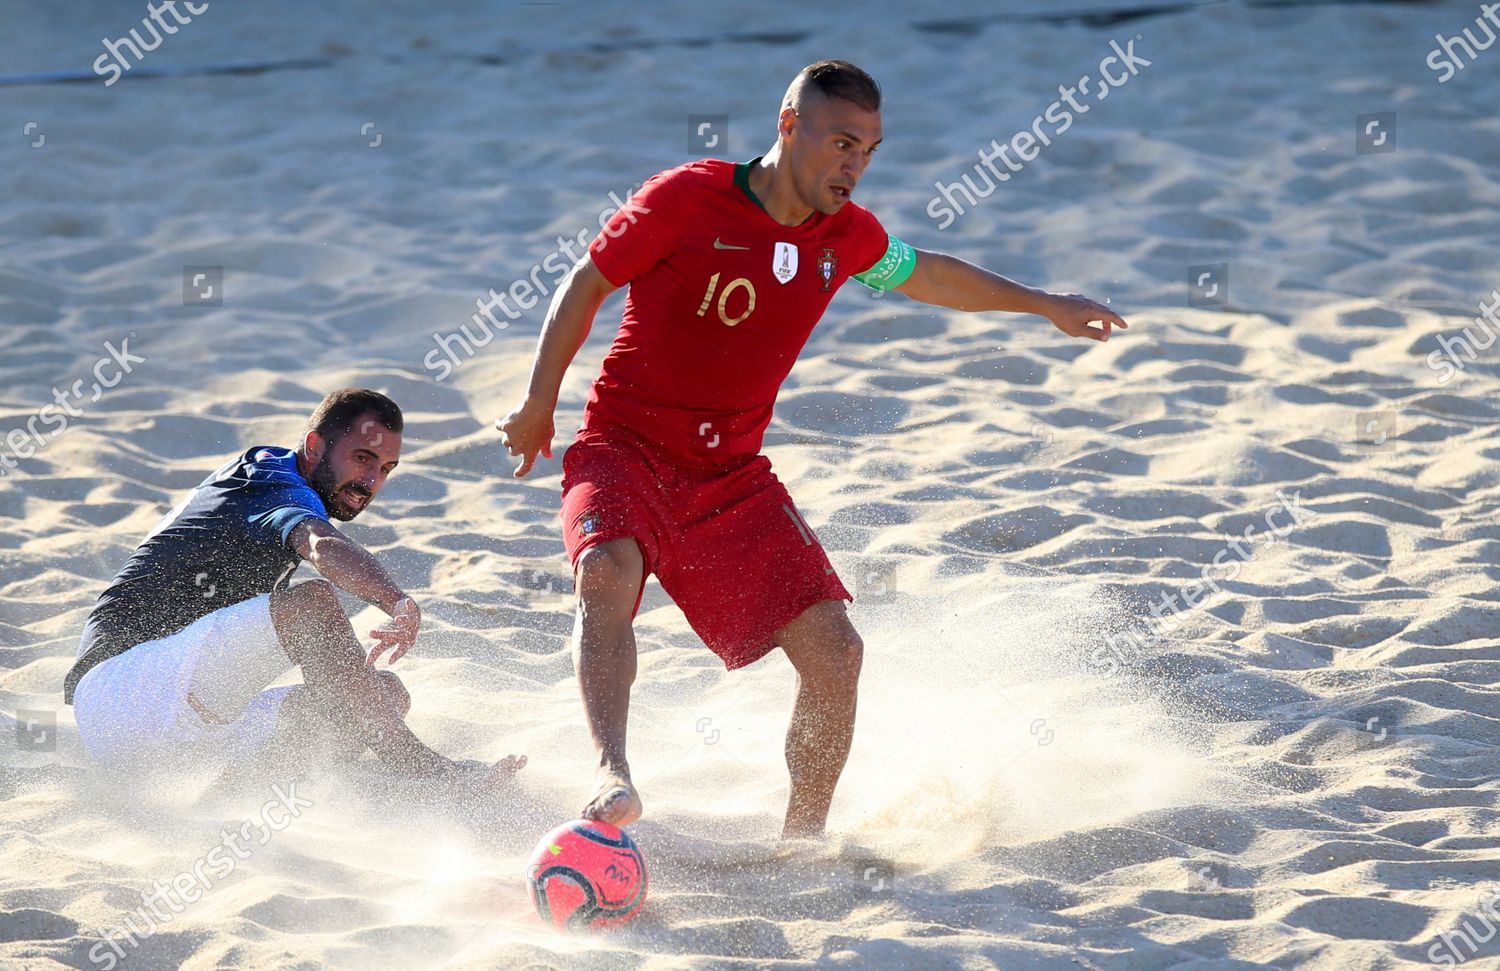 Player Portuguese National Team Belchior R Fights Editorial Stock Photo Stock Image Shutterstock [ 971 x 1500 Pixel ]